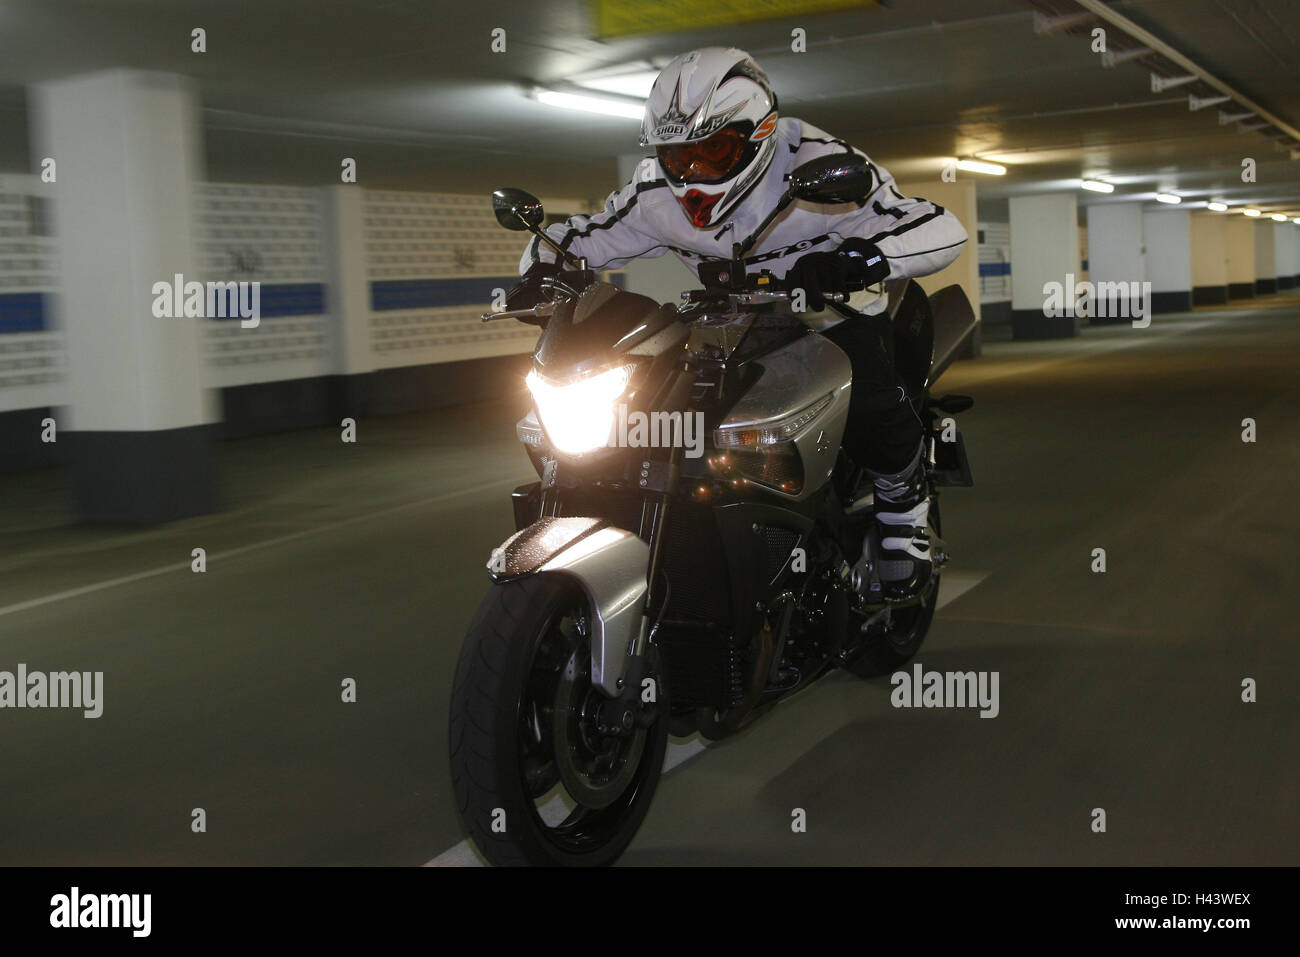 Underground parking, Suzuki B King, drive, B King, motorcycle, Suzuki, dynamically, motion, gloomily, atmosphere, dynamics, silver, quickness, grimly, gloomily, people, drivers, motorcyclists, inside, risk, flight, icon, pursuit hunt, Stock Photo